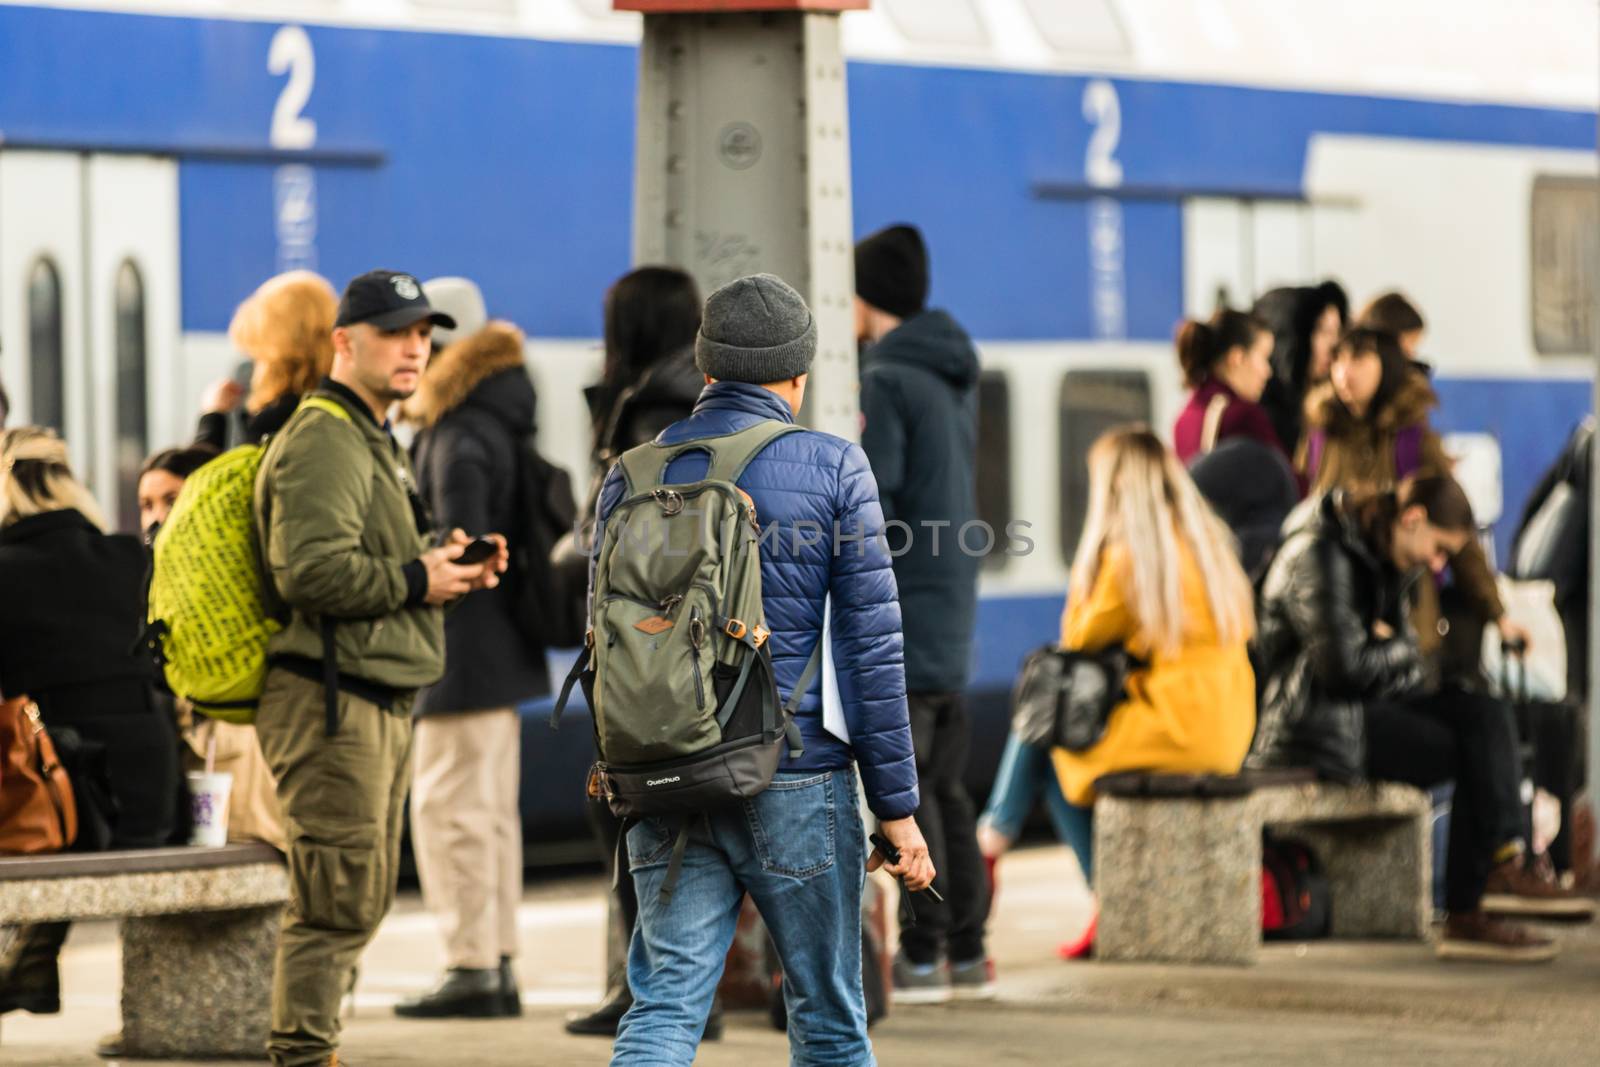 Travelers and commuters carry luggage and backpacks on the train platform of Bucharest North Railway Station (Gara de Nord Bucharest) in Bucharest, Romania, 2020